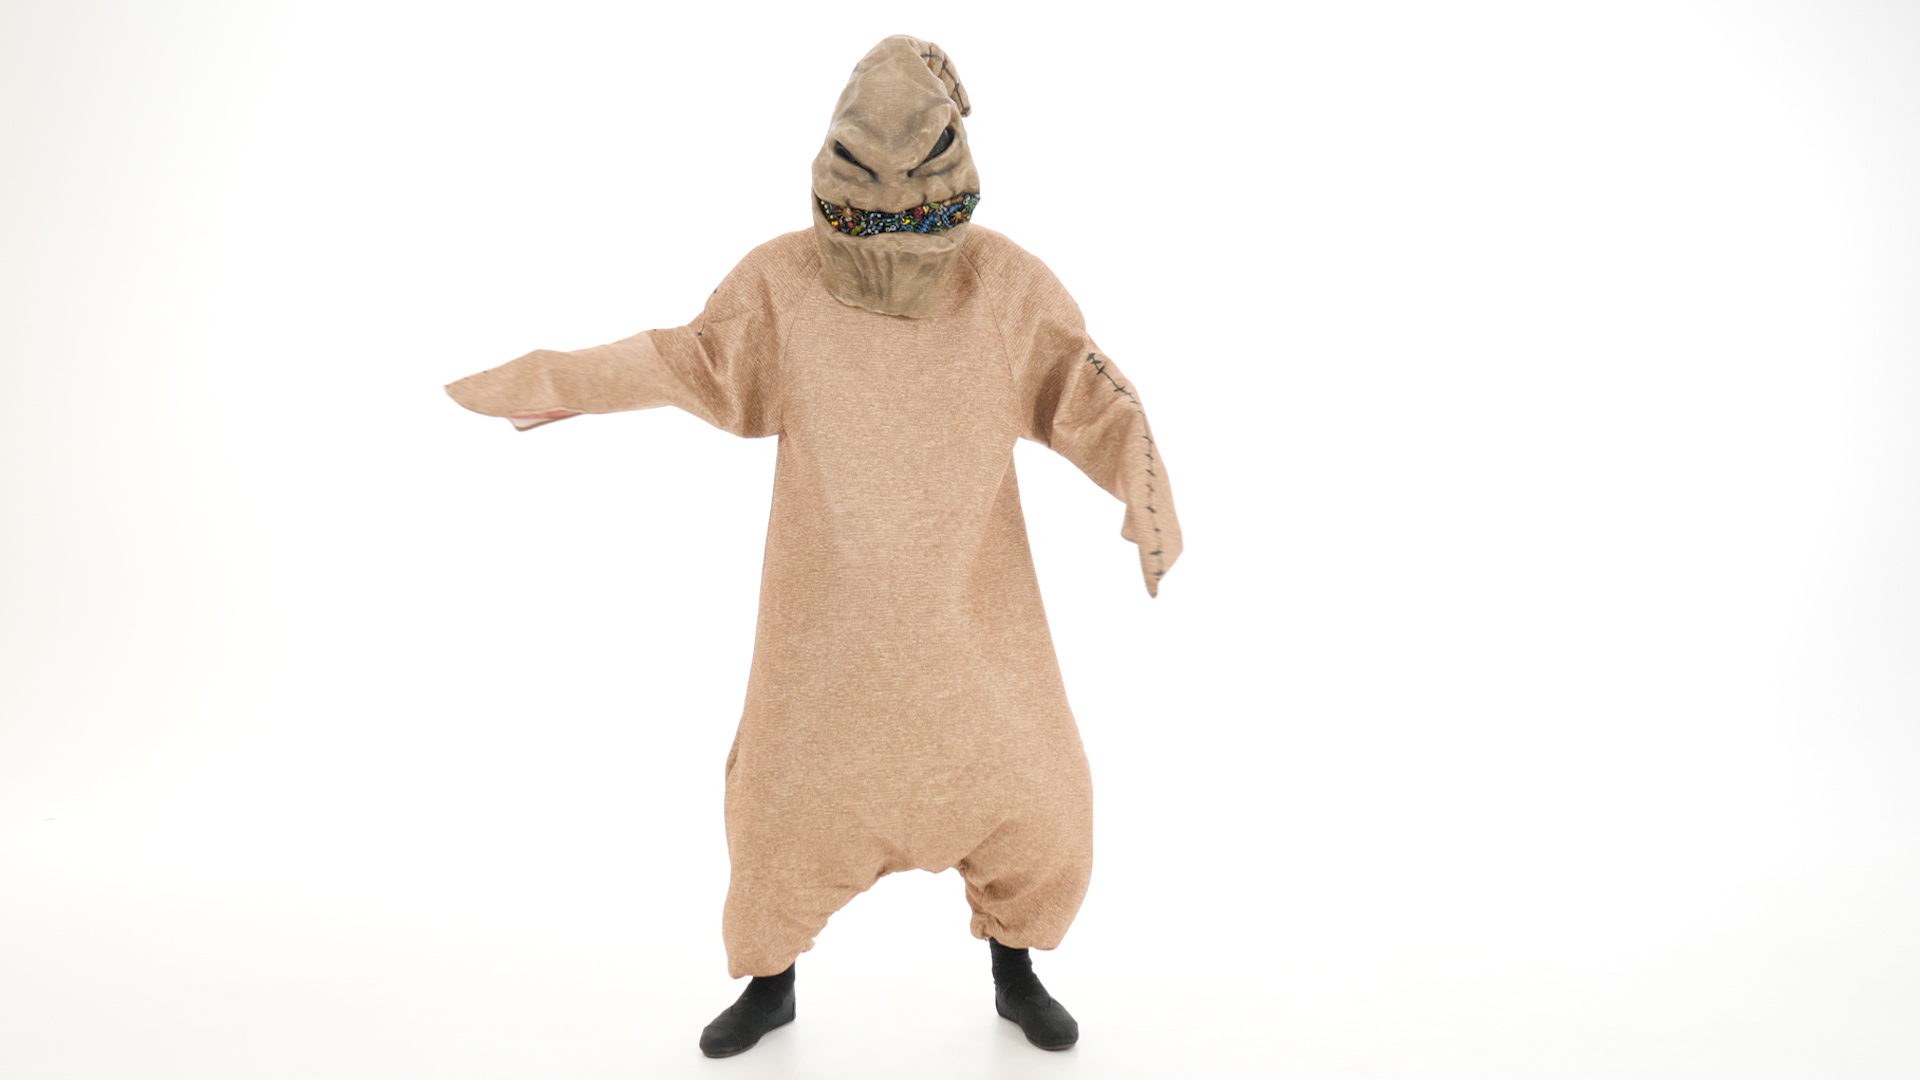 Transform into the Oogie Boogie from Nightmare Before Christmas in this prestige adult costume.